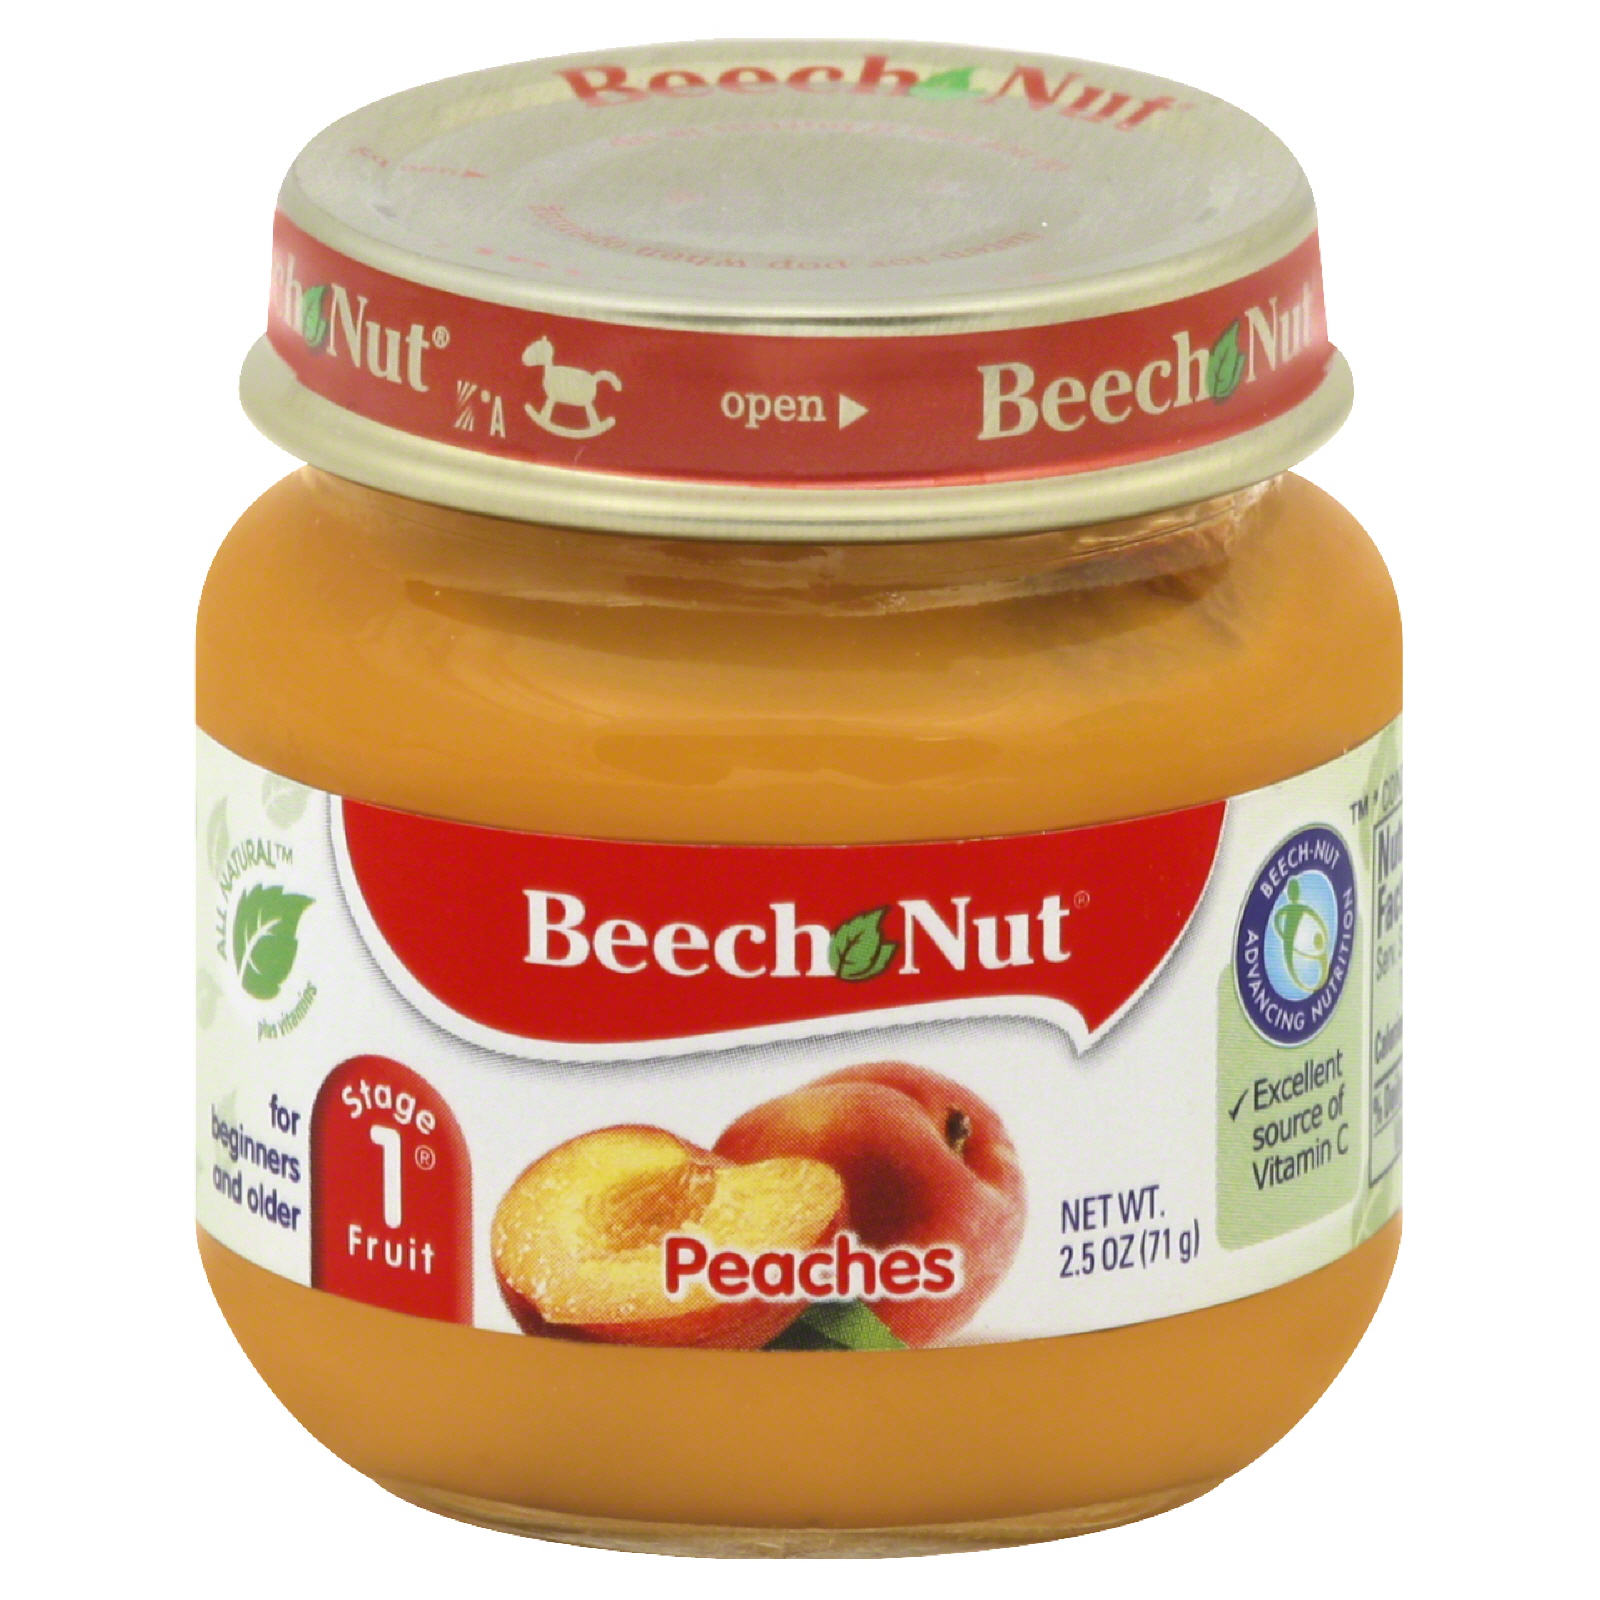 Beech-Nut Peaches, Stage 1 Fruit, 2.5 oz (71 g)